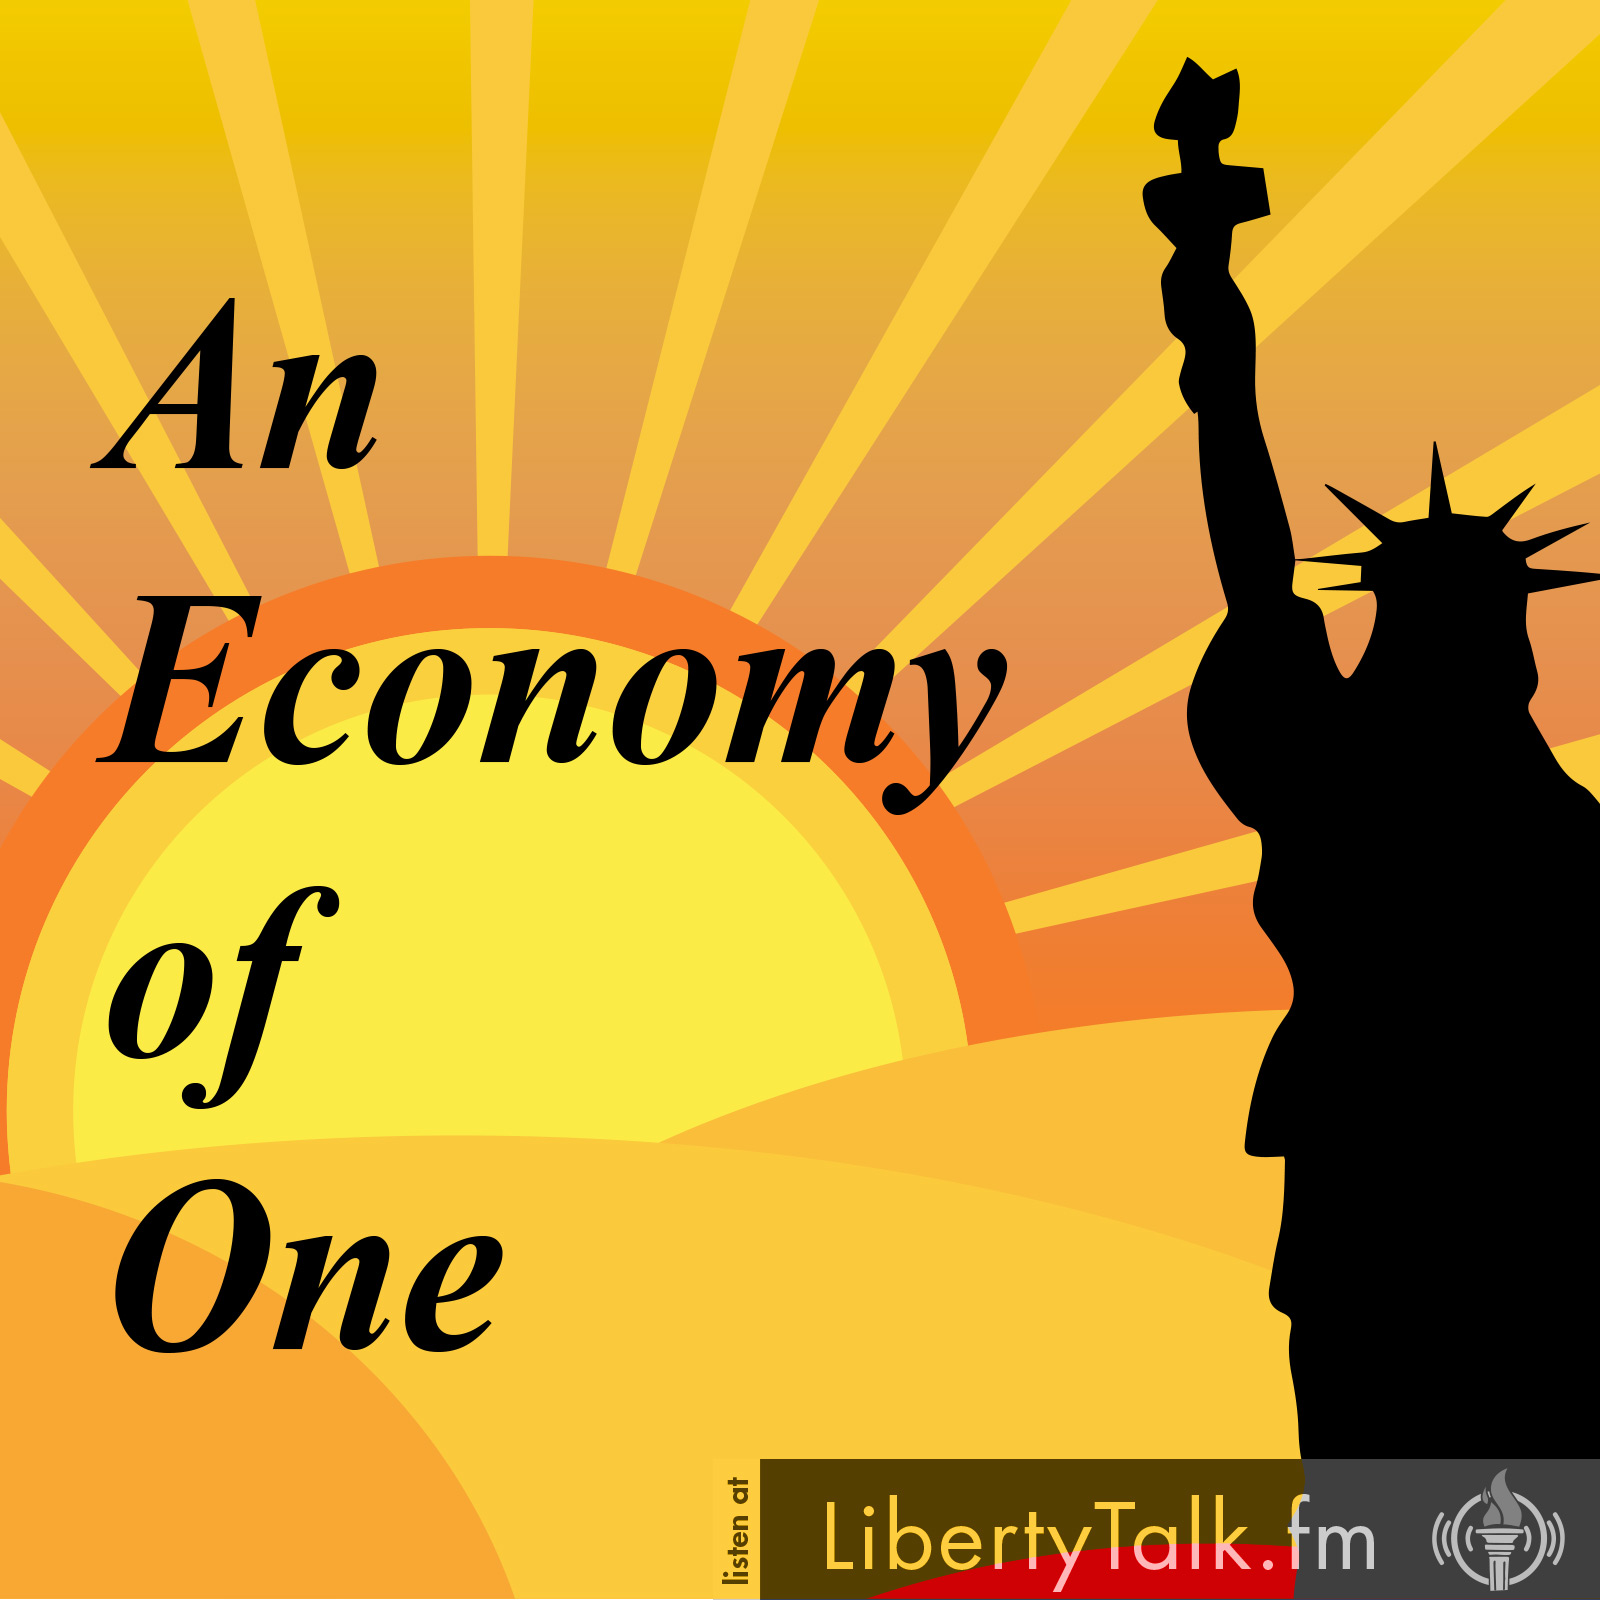 An Economy of One on Liberty Talk FM